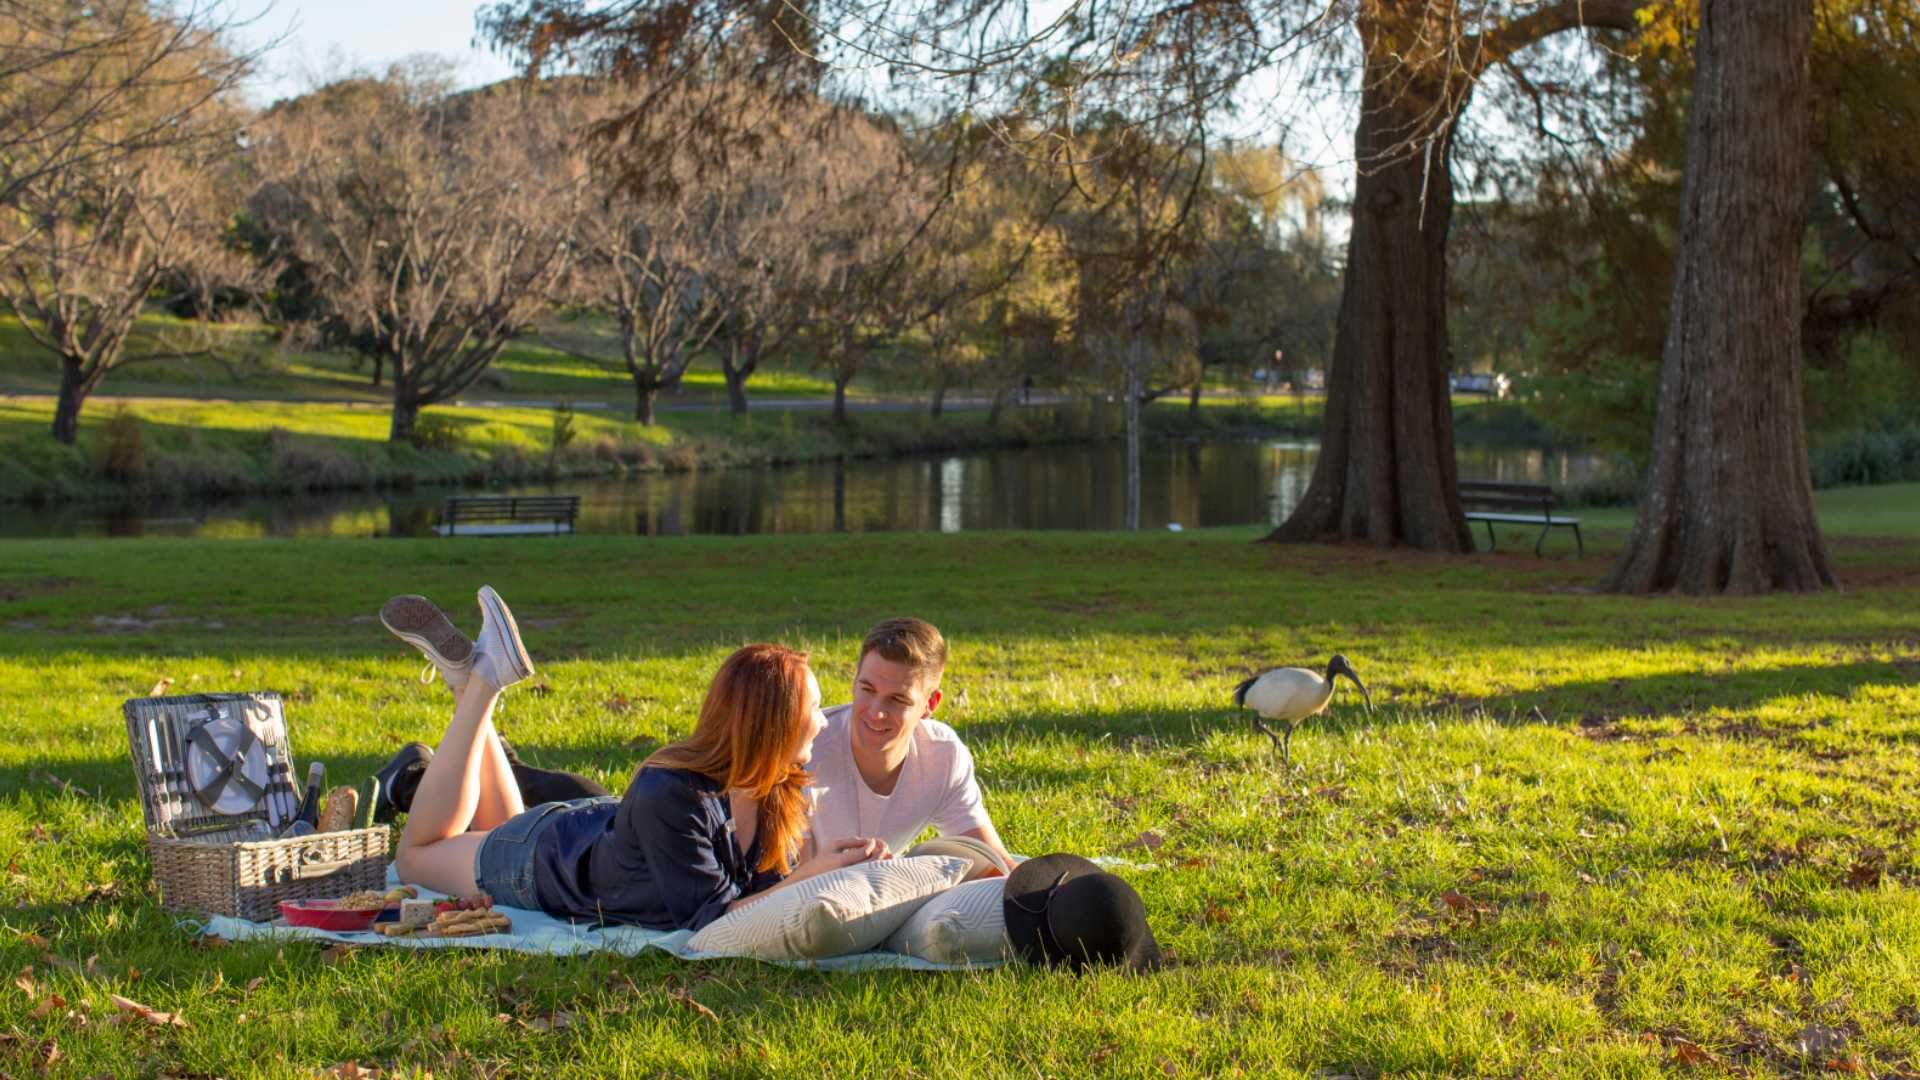 NSW Health Has Confirmed That Sitting Down to Eat Outdoors Is Permitted